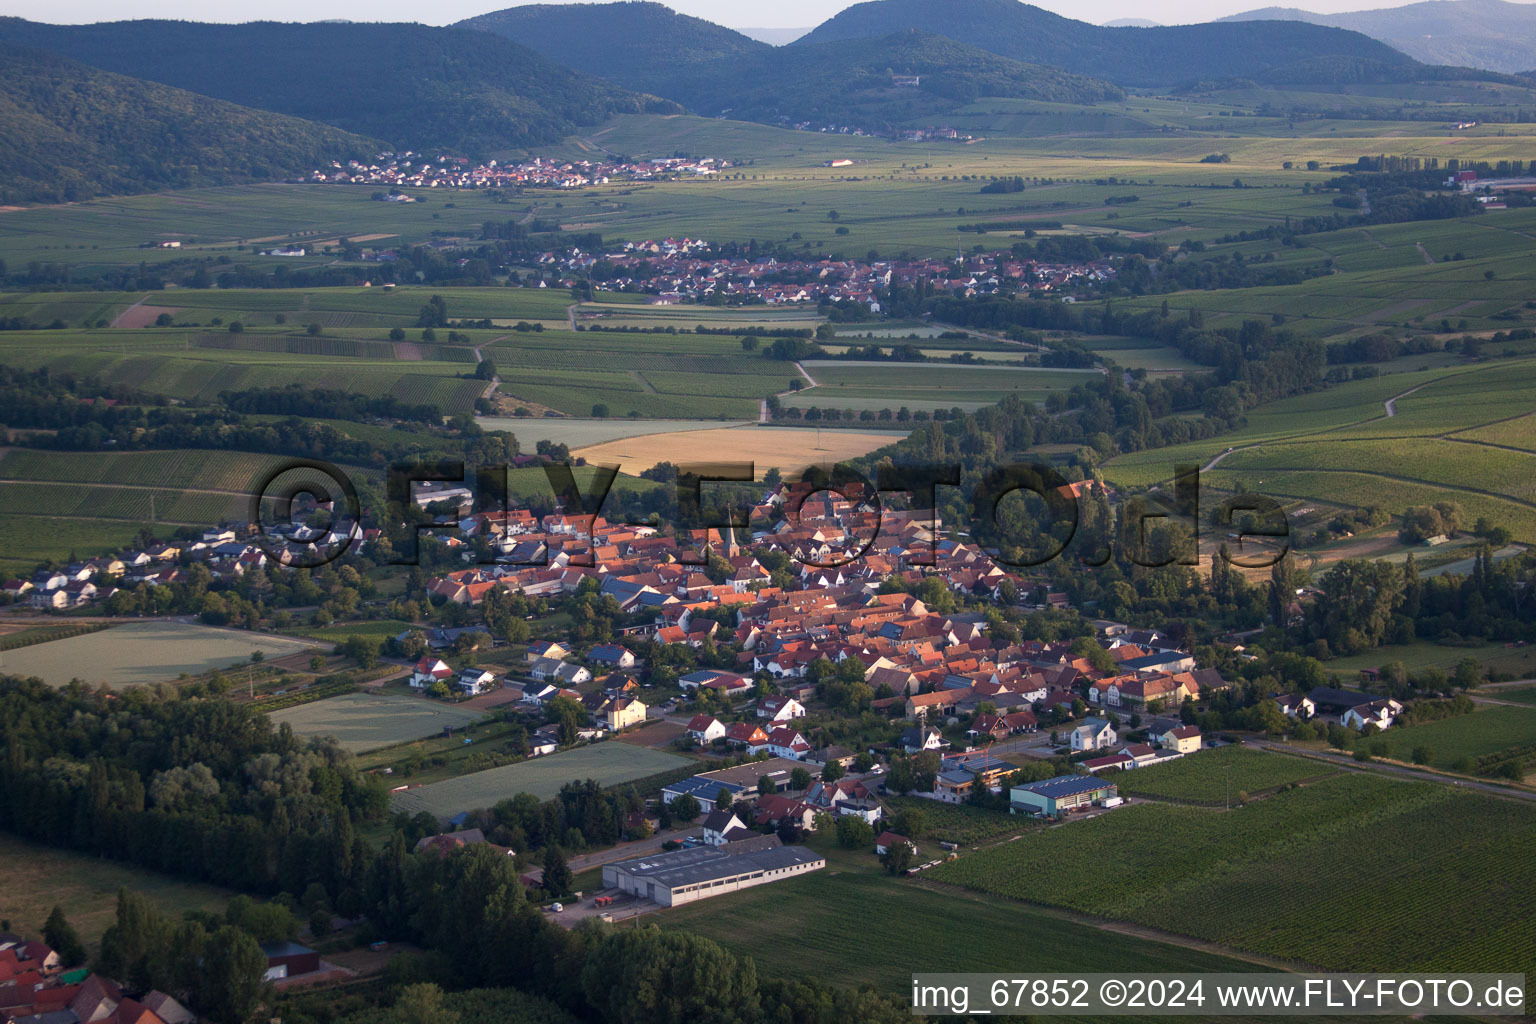 Aerial photograpy of Village - view on the edge of agricultural fields and wine yards in the district Heuchelheim in Heuchelheim-Klingen in the state Rhineland-Palatinate, Germany